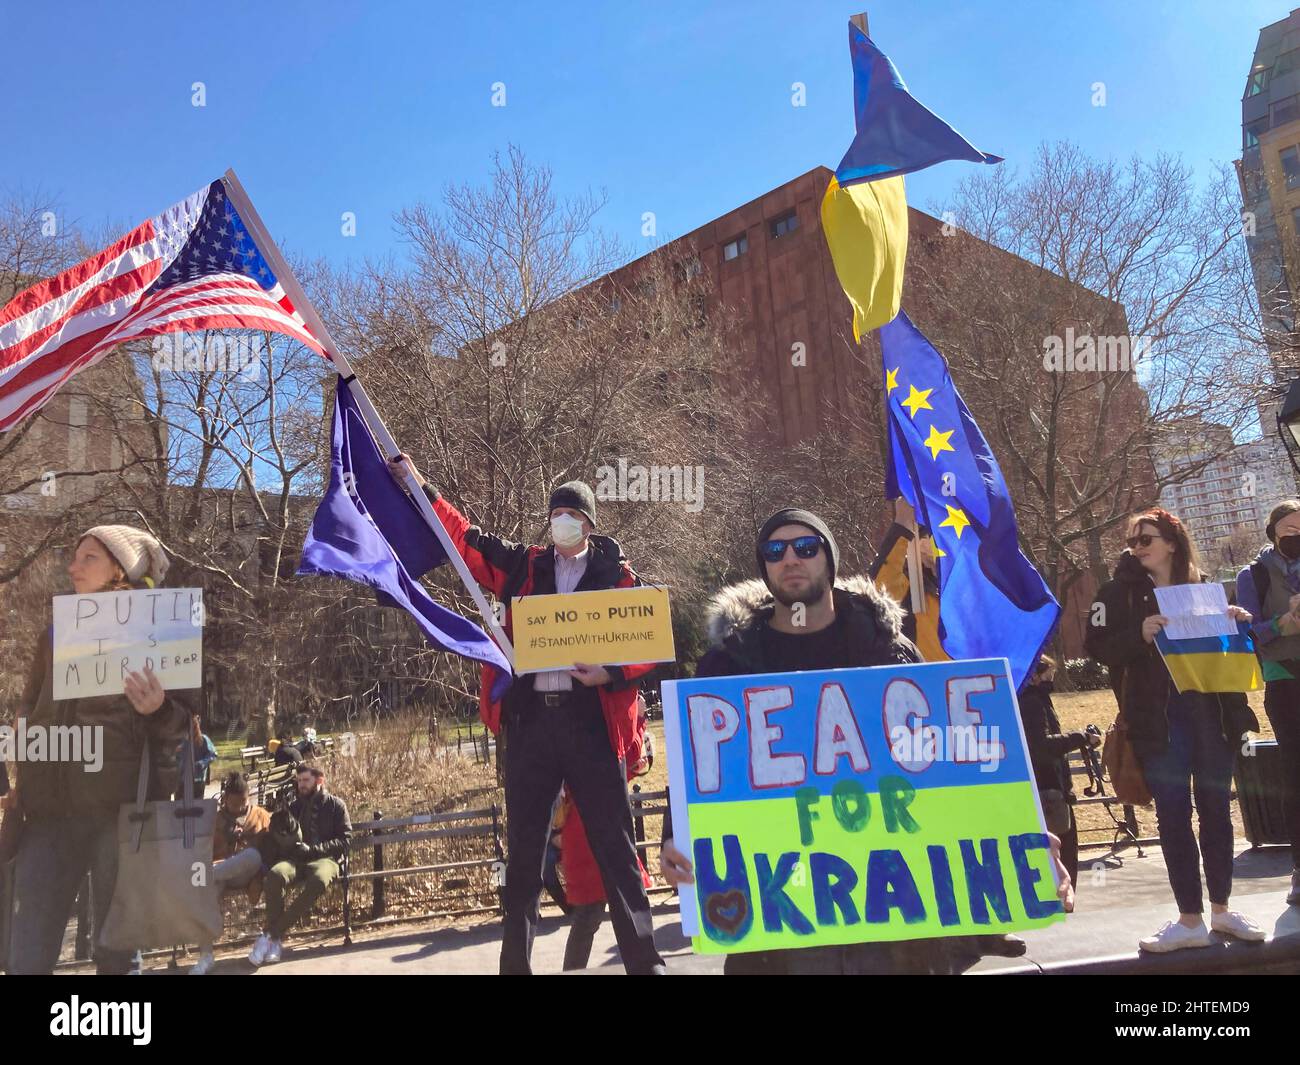 Ukrainian-Americans and their supporters protest the Russian invasion and show support for the citizens of the Ukraine, in Washington Square Park in New York on Sunday, February 27, 2022. (© Frances M. Roberts) Stock Photo